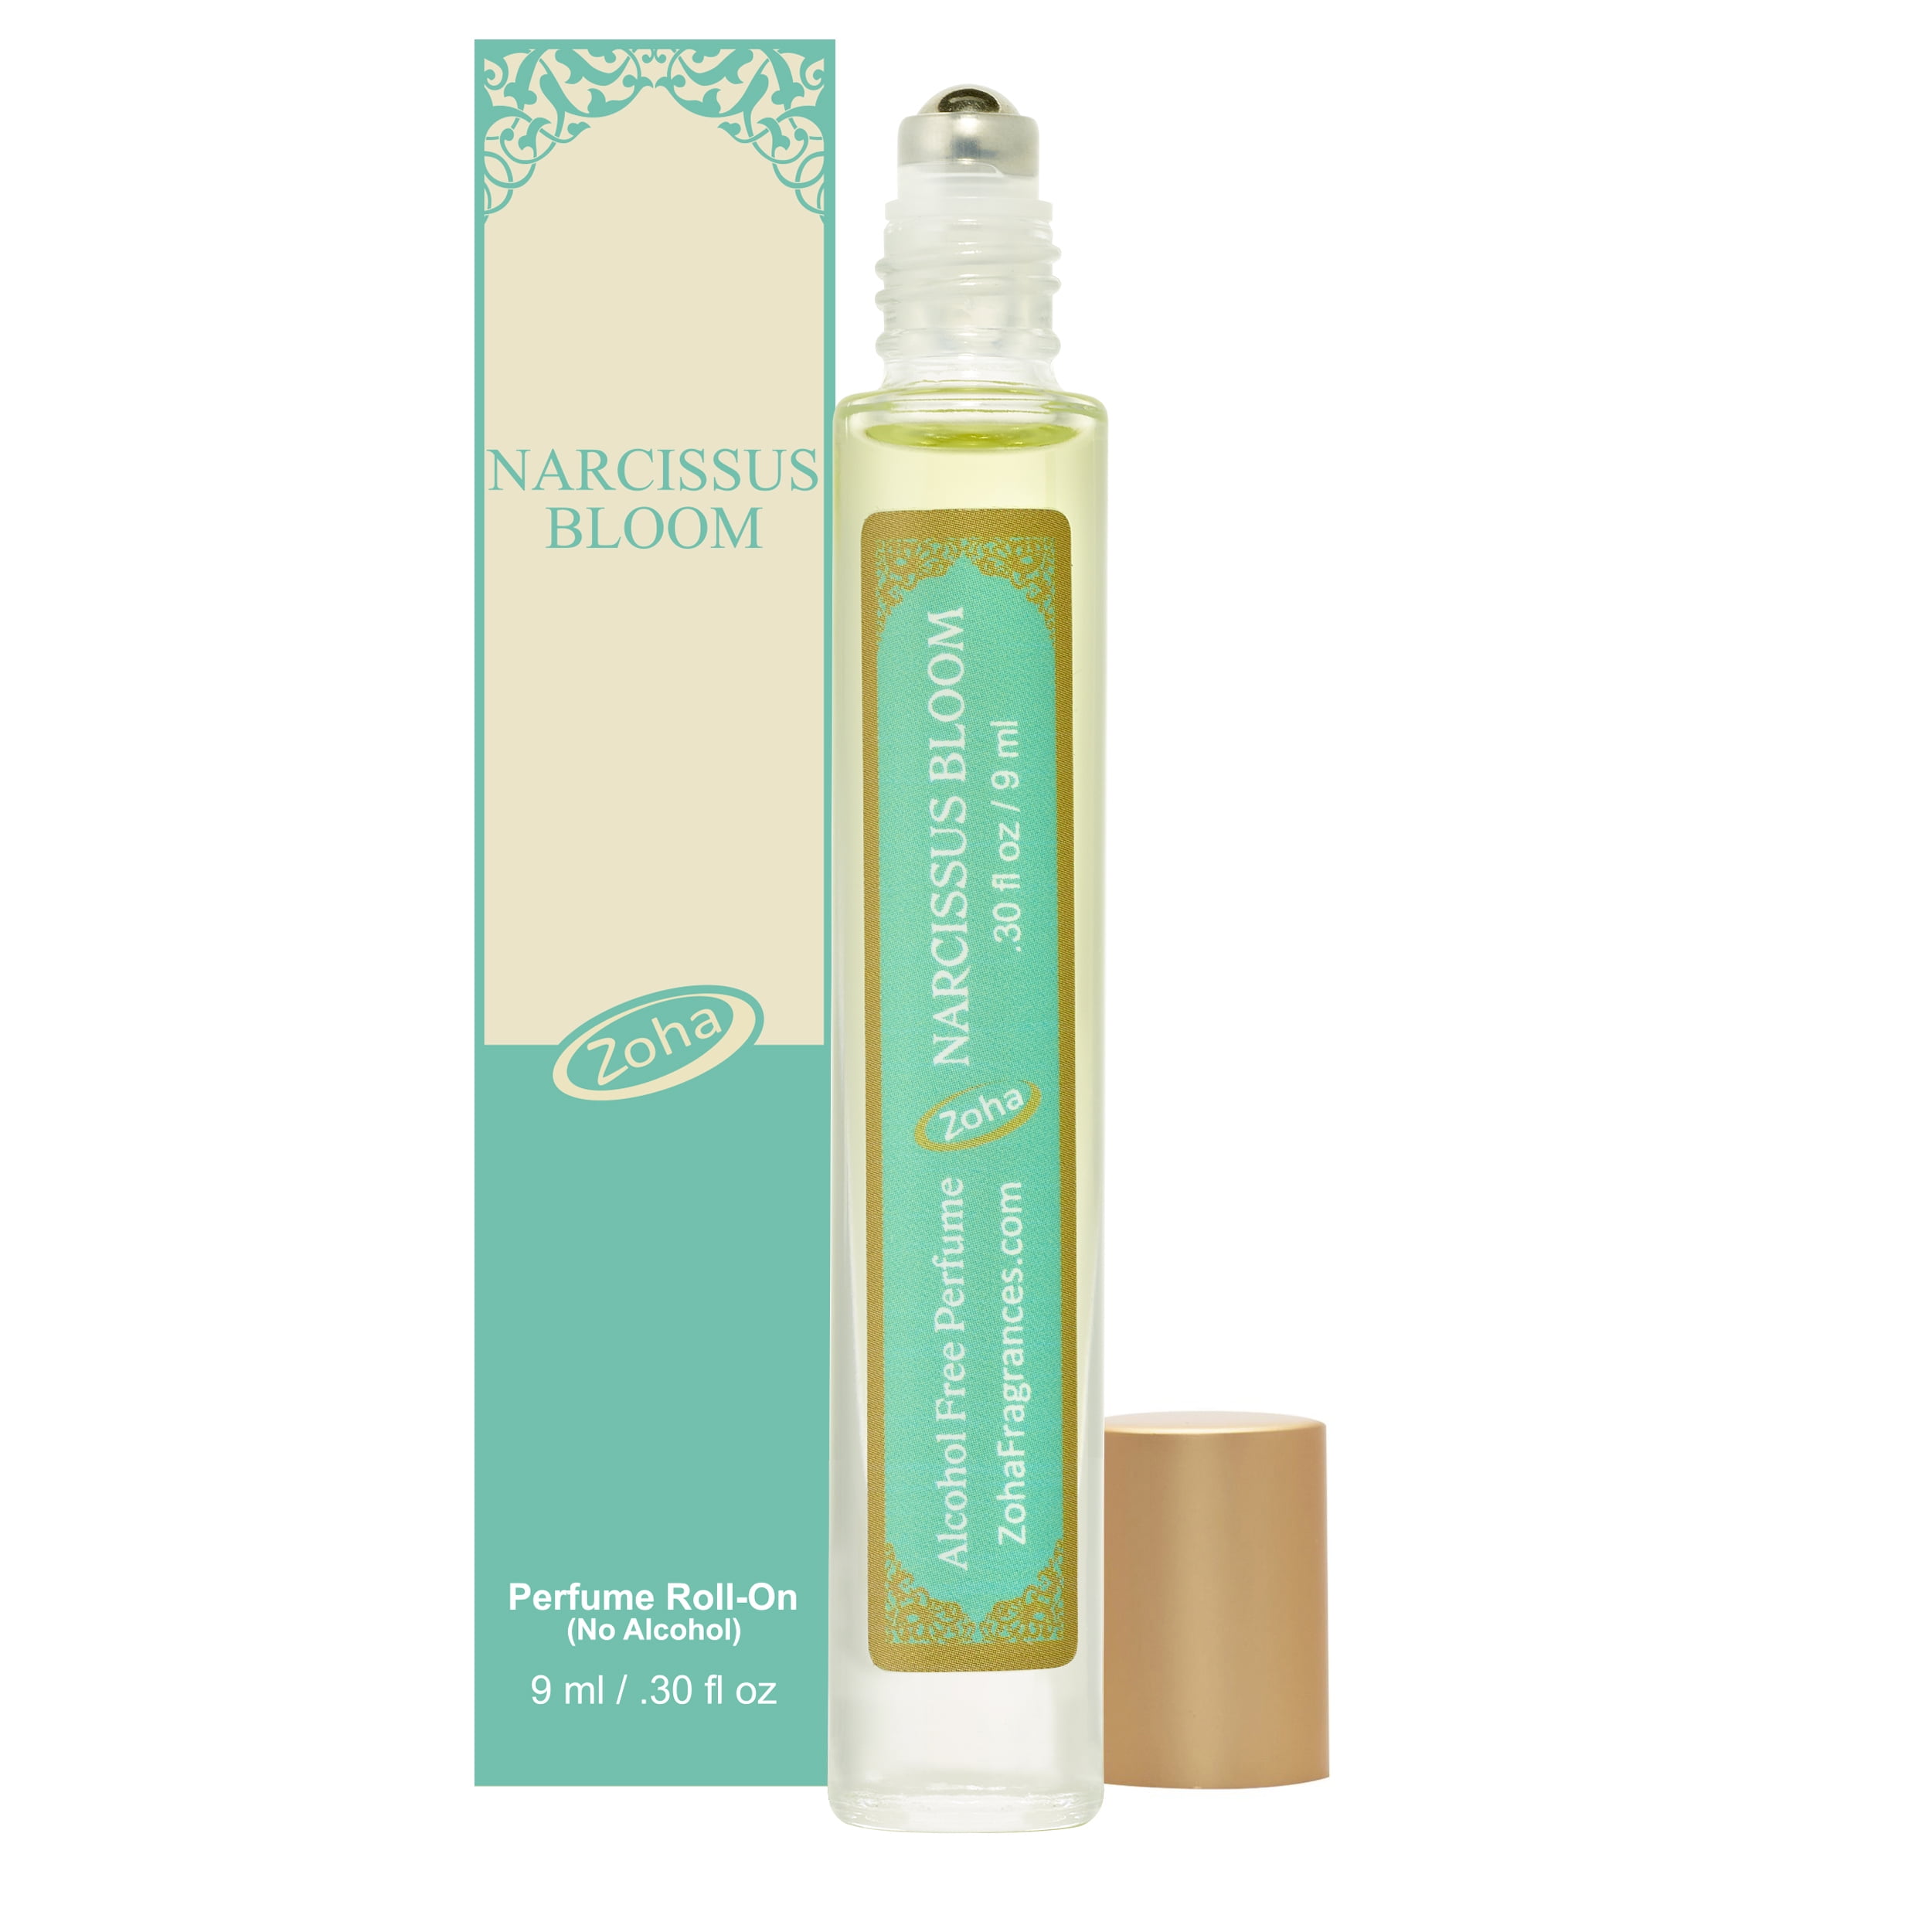 Zoha|Narcissus Bloom Perfume Oil|Alcohol Free Long Lasting Narcissus ...